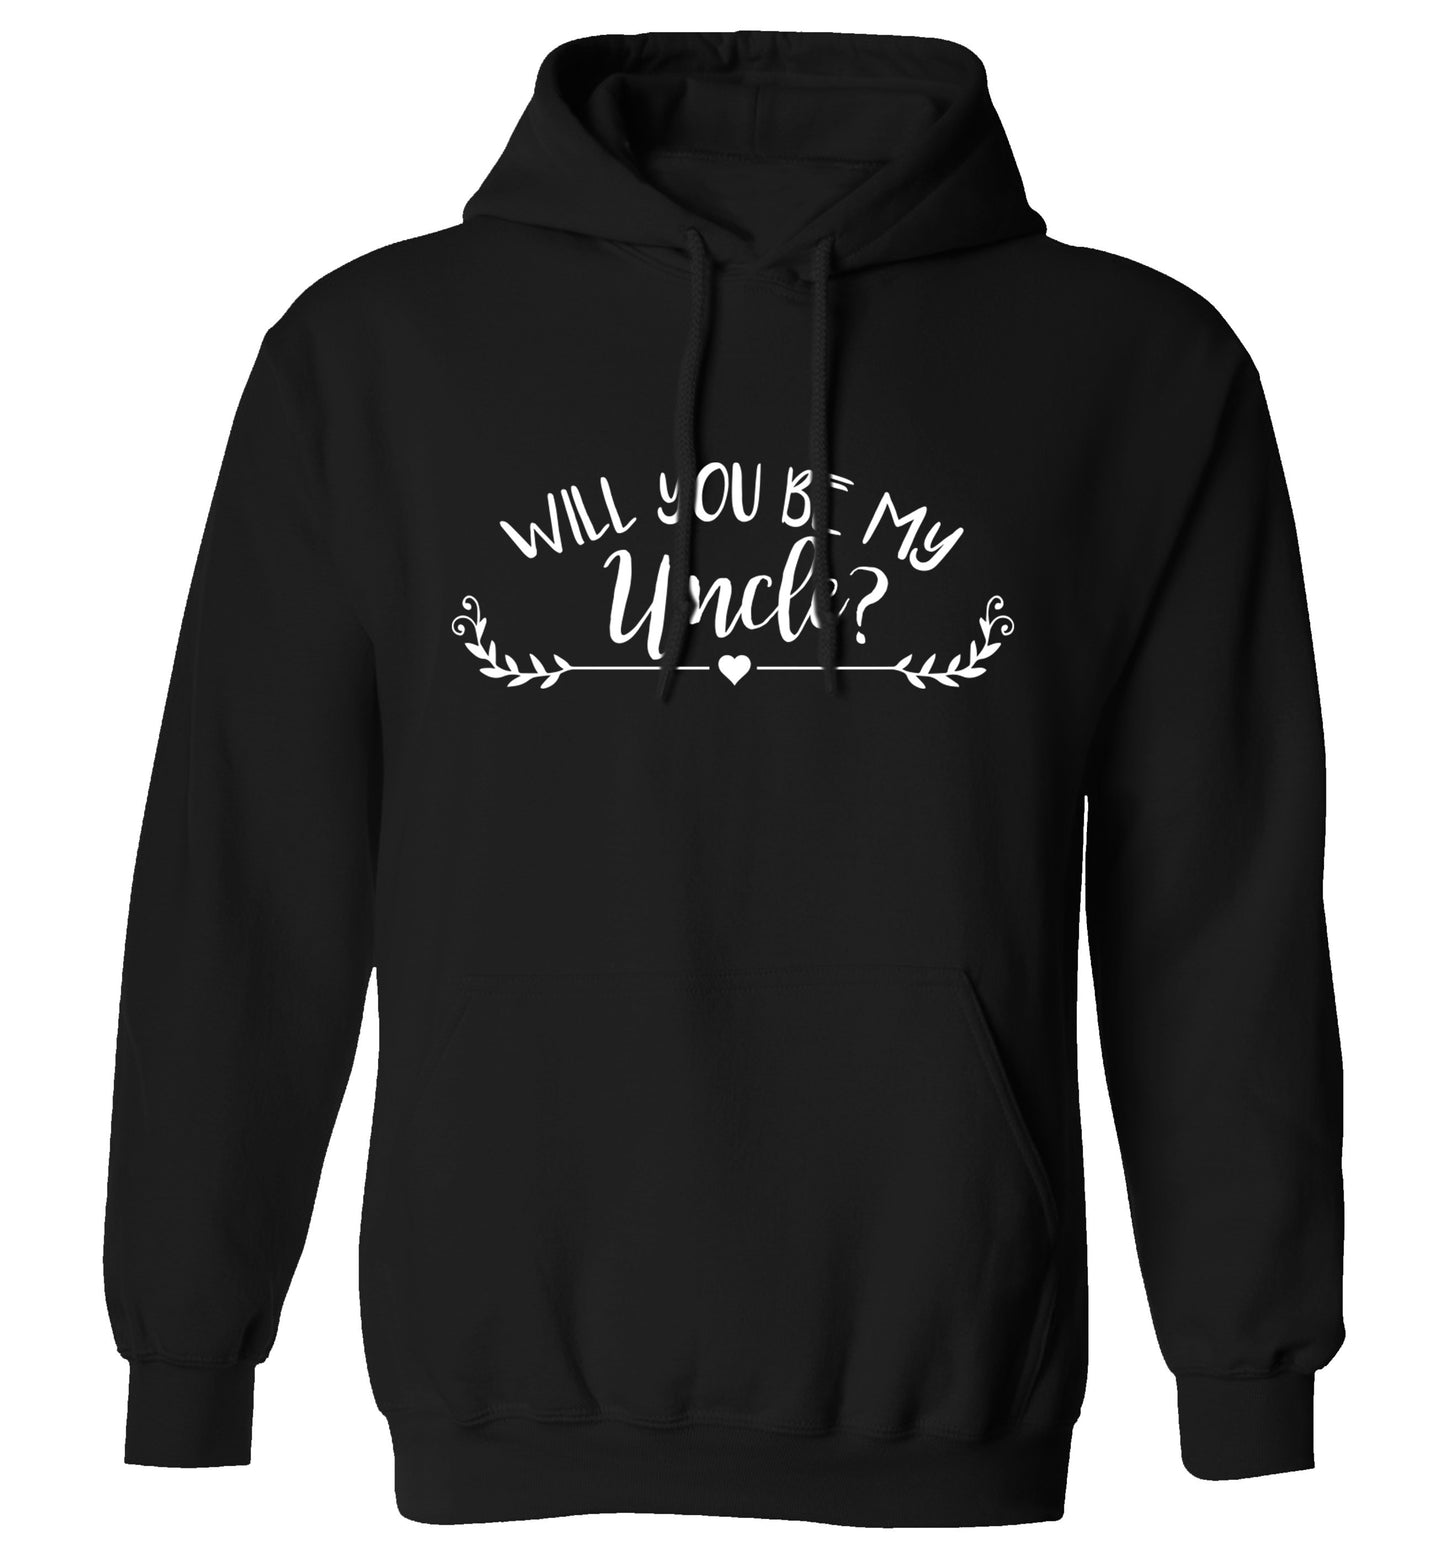 Will you be my uncle? adults unisex black hoodie 2XL